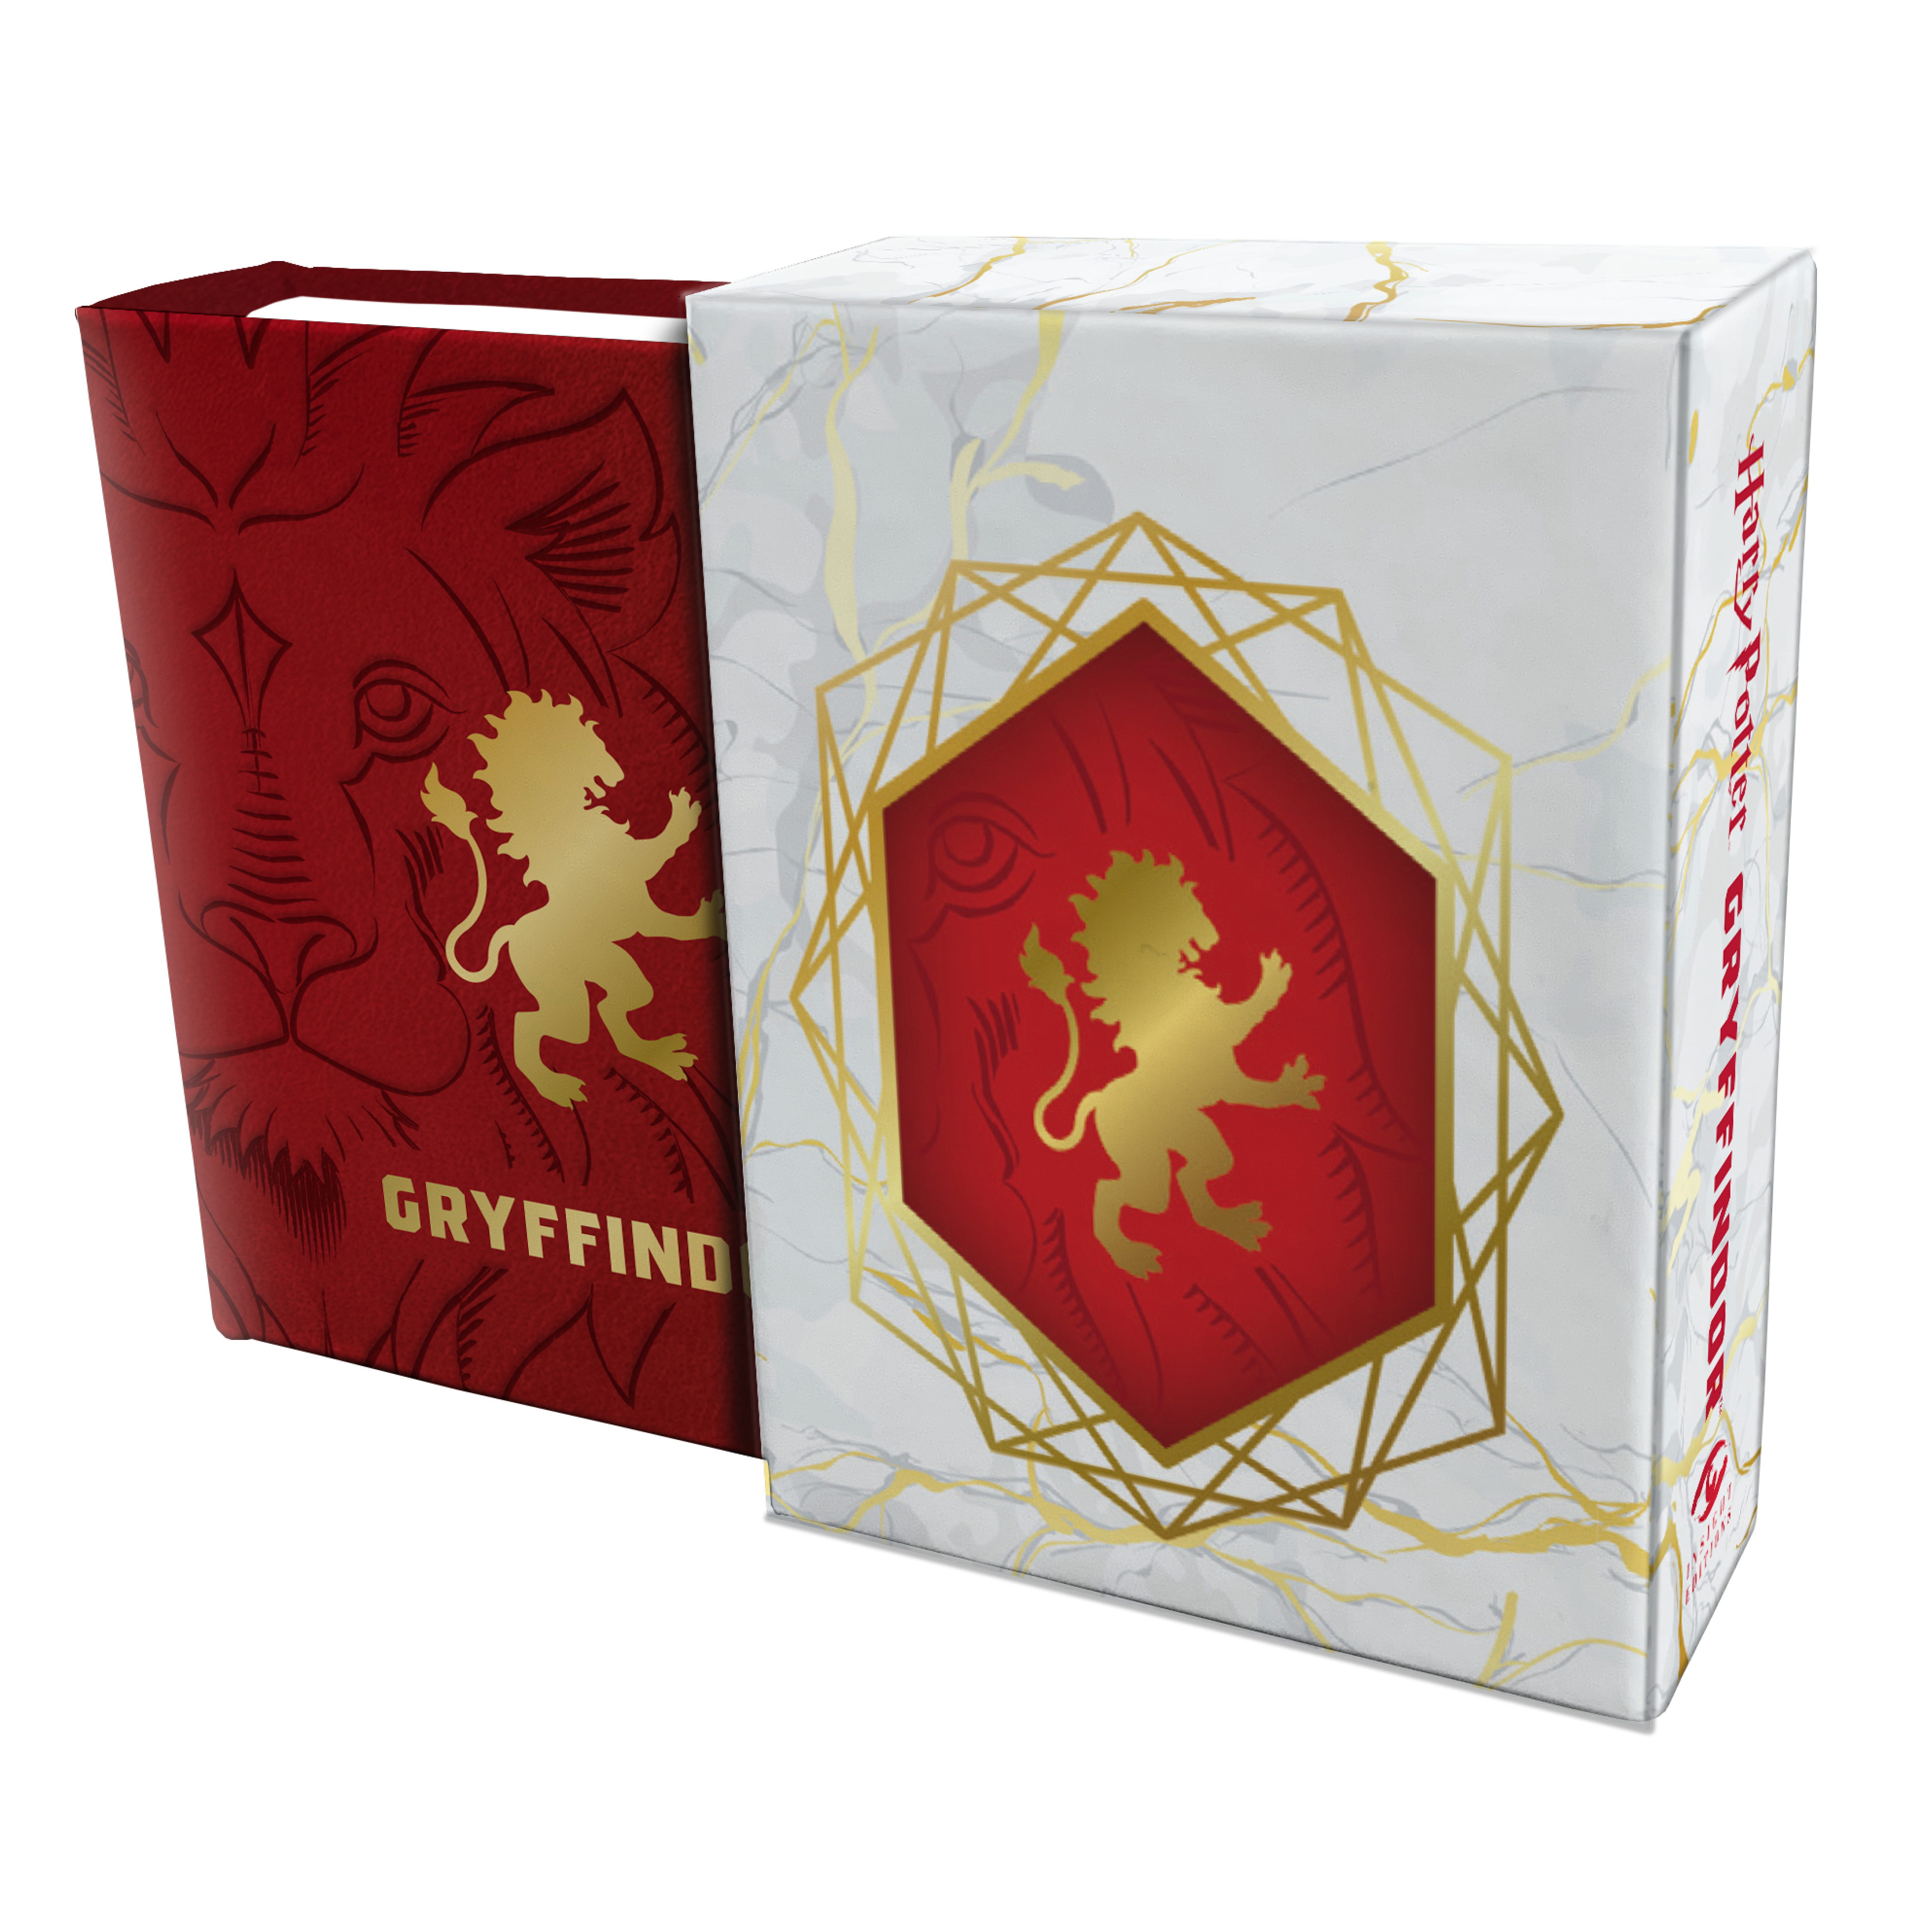 Find out everything you need to know about Gryffindor with this pocket book.